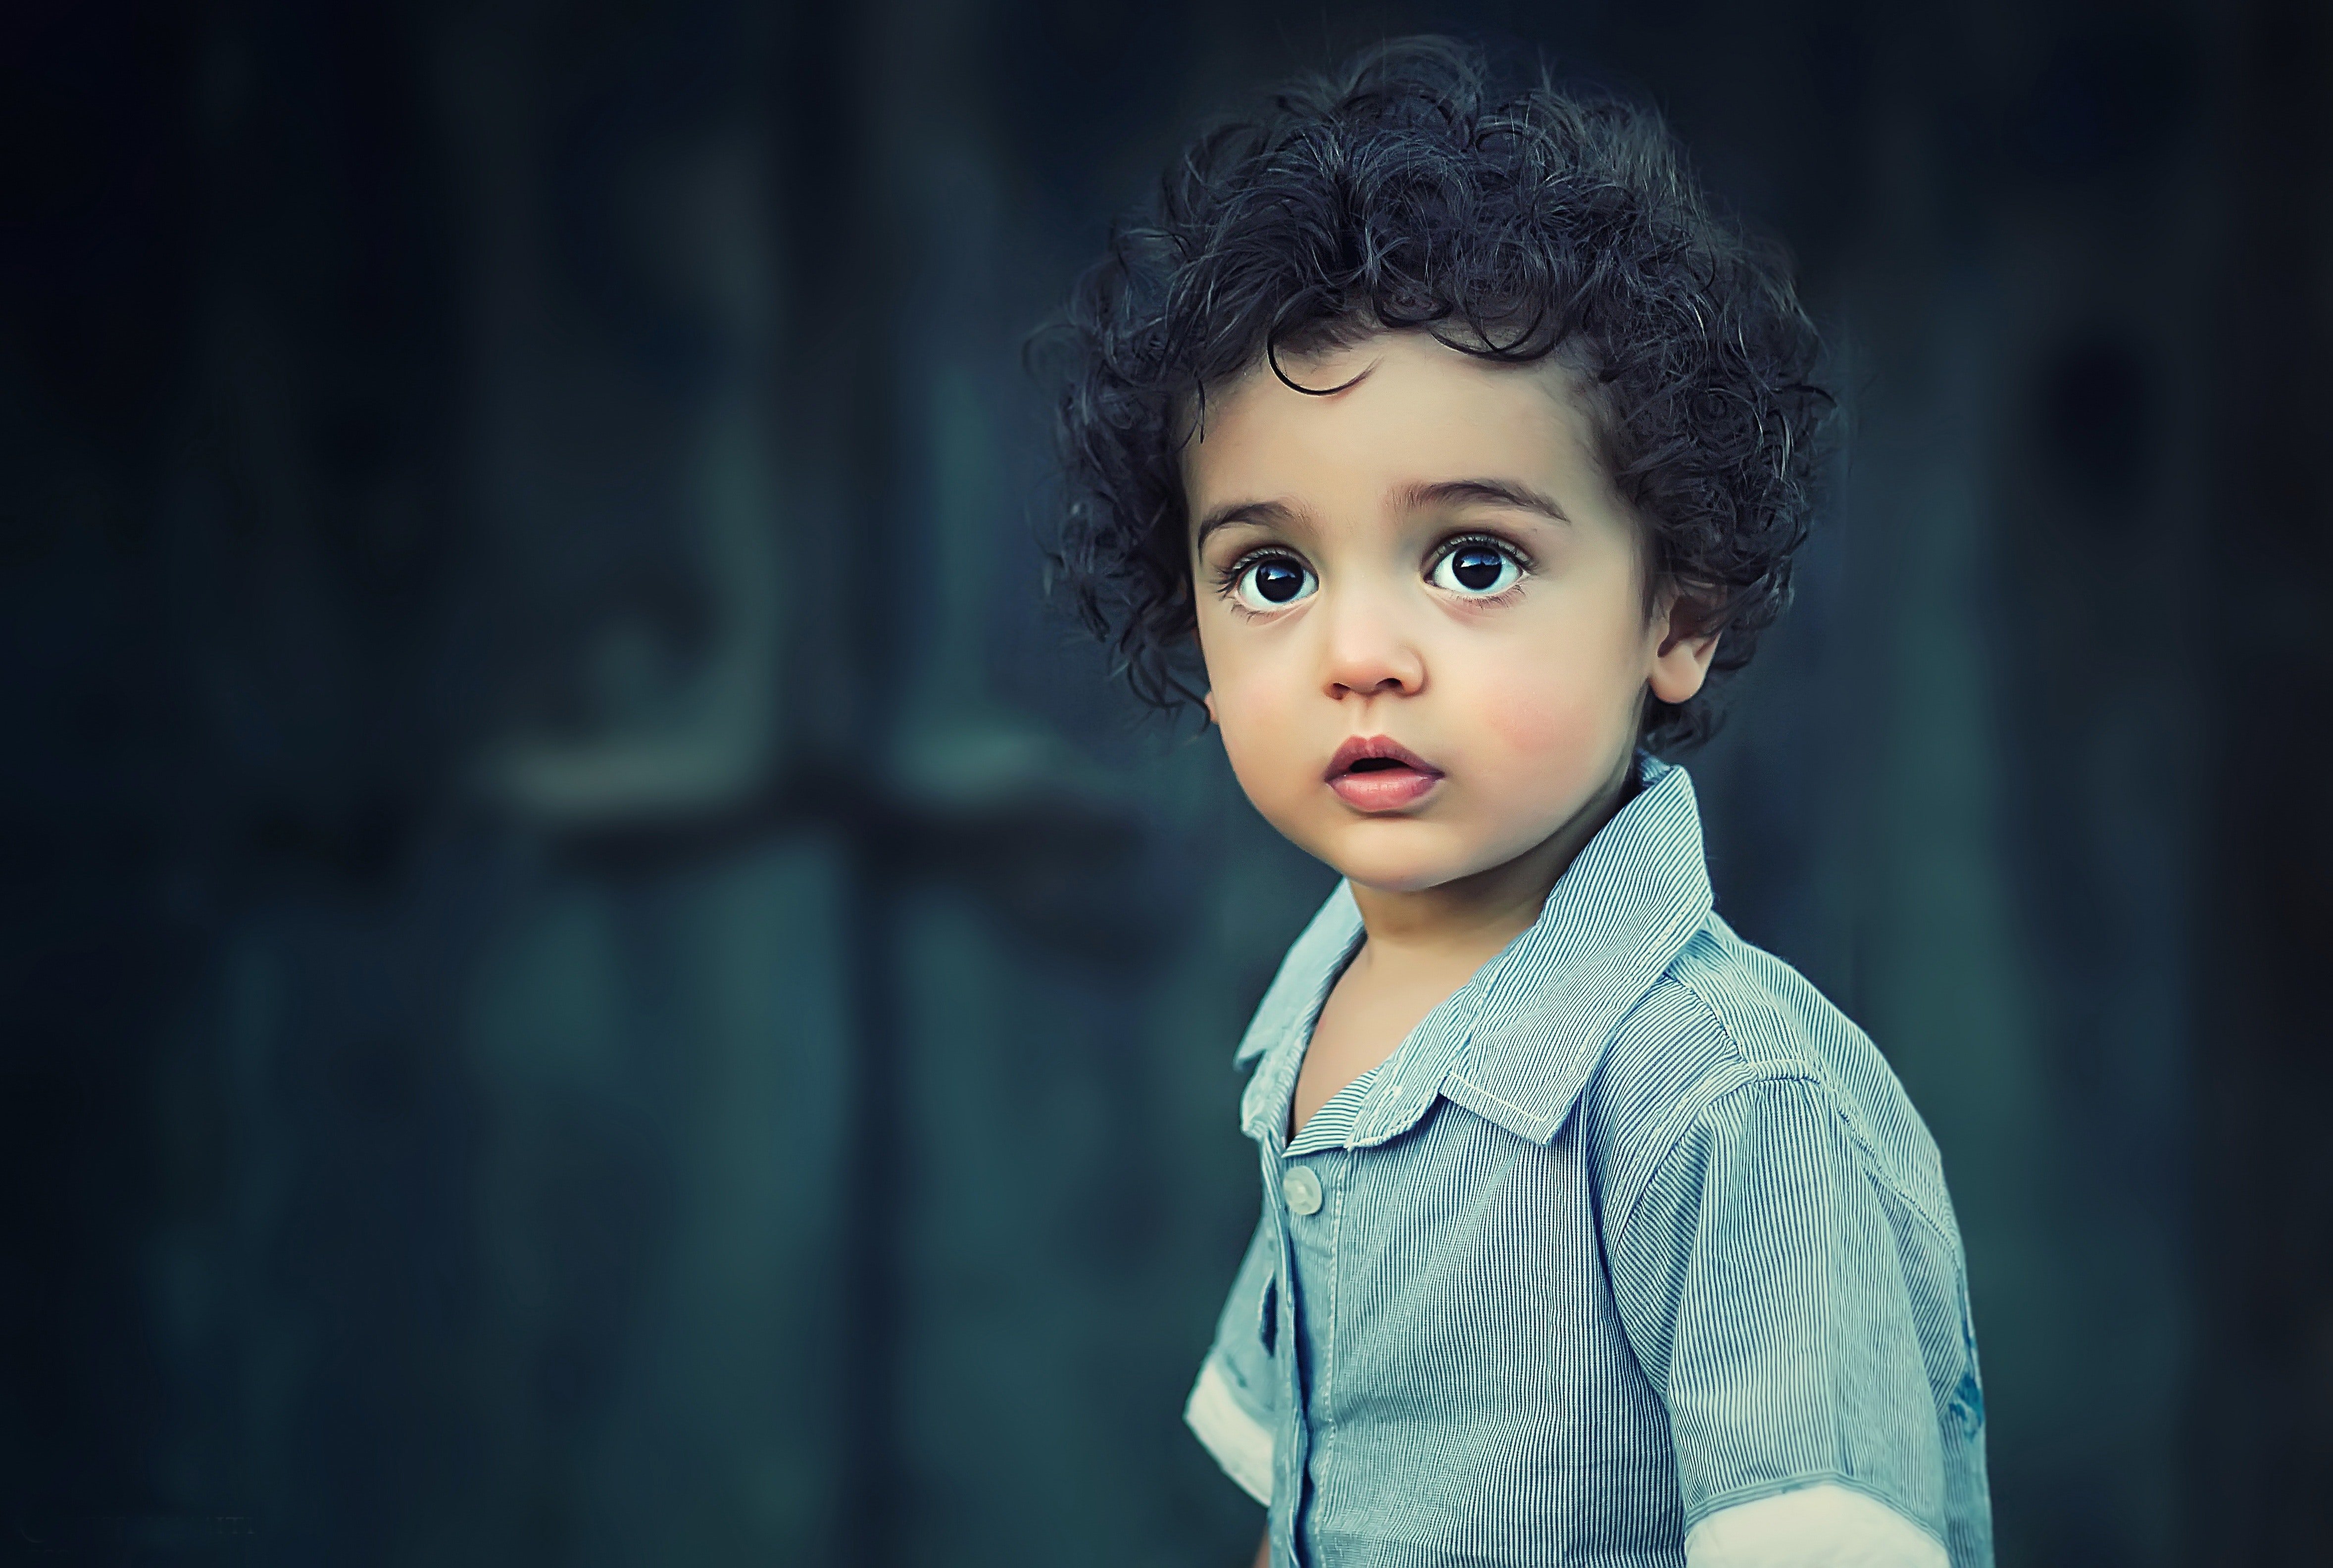 Pictured - A photo of a toddler with curly hair wearing a gray collard shirt | Photo: Pexels 